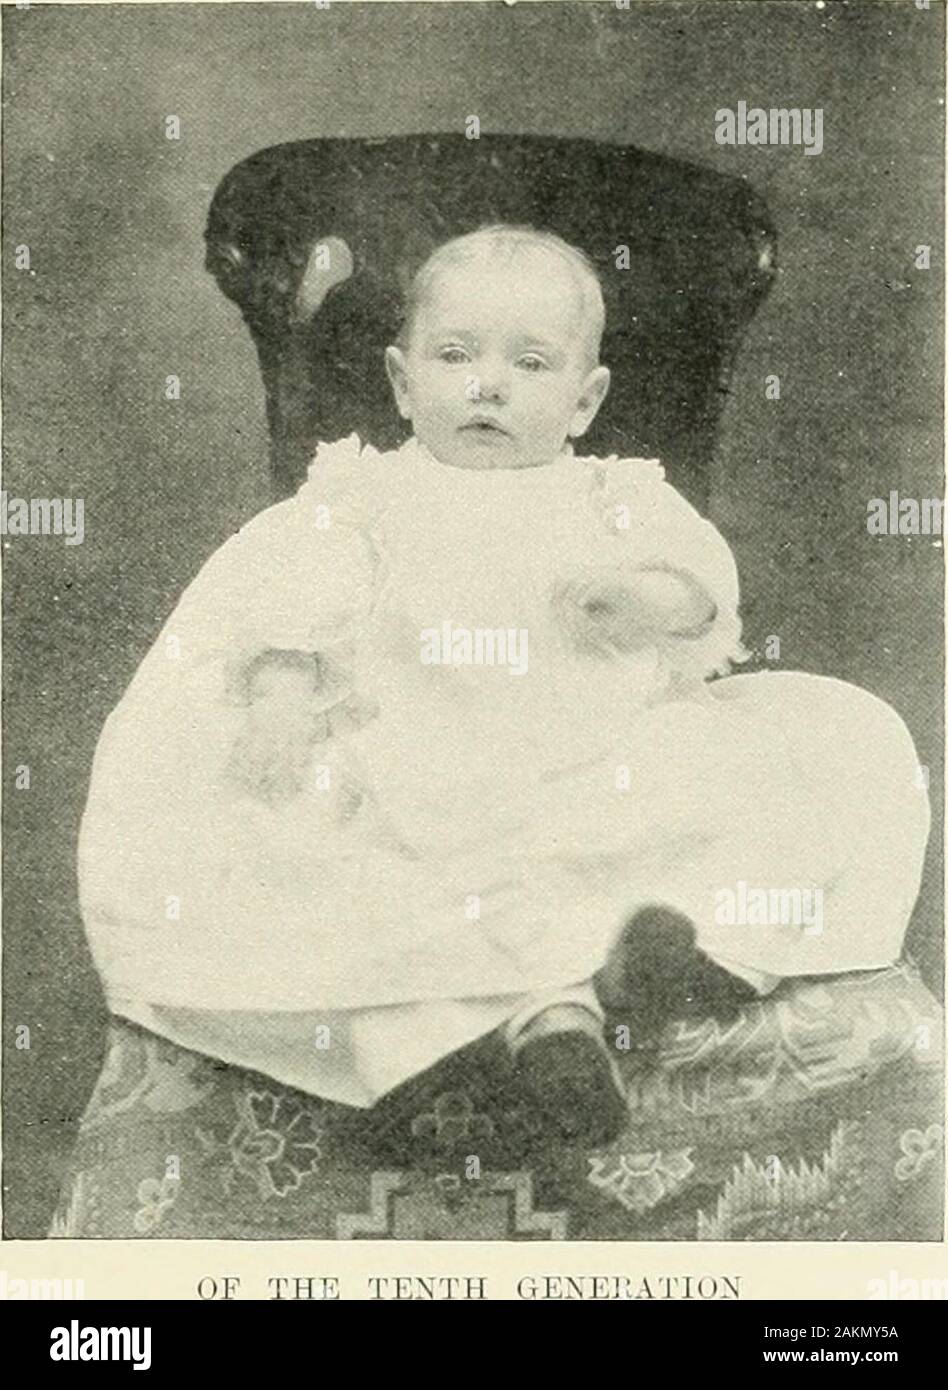 The Greene family and its branches from A.D861 to A.D1904 . -. George E. Winsor, b. May 2, 1831 ; m. Emeline A. Eddy in 1S50. Their son CharlesE., born 1851, and their daughter. Minnie .., born in 1864, never married. Their dau.,Anna Cora, was born in 1S62. She is the wife of Edward Gee, and has two children, Etheland Helen. Sarah Winsor-Esten, b. Aug. 25, 1834 ; m. Leprelett Esten in 1855. 2 children.Charles and Florence died in childhood. Leprelett W., b. in 1856 ; m. Alice D. Bradford.No children. Walter K. Esten, b. 1868 • m. Alice L. Whitehead. One child, FlorenceGertrude, born 1903- Ber Stock Photo